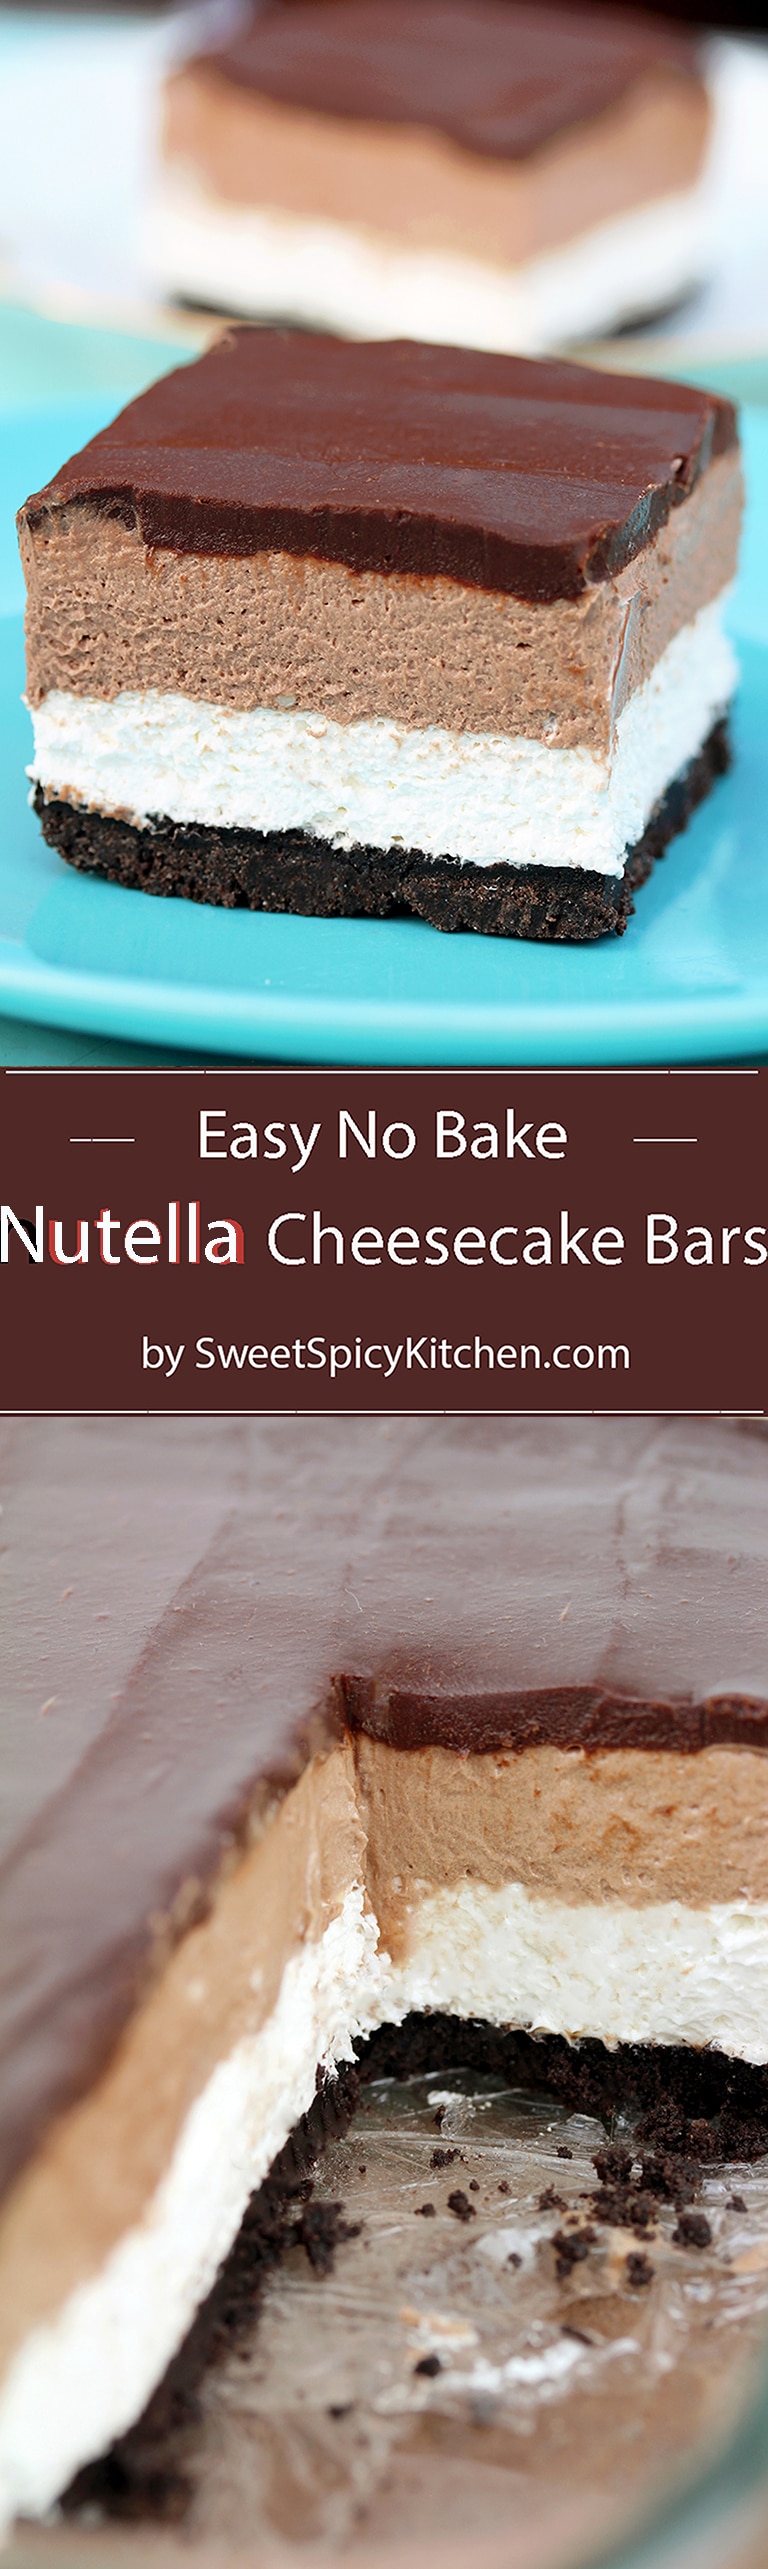 Easy No Bake Nutella Cheesecake Bars – quick and perfectly creamy cream cheese and Nutella dessert, with Oreo base and chocolate ganache.